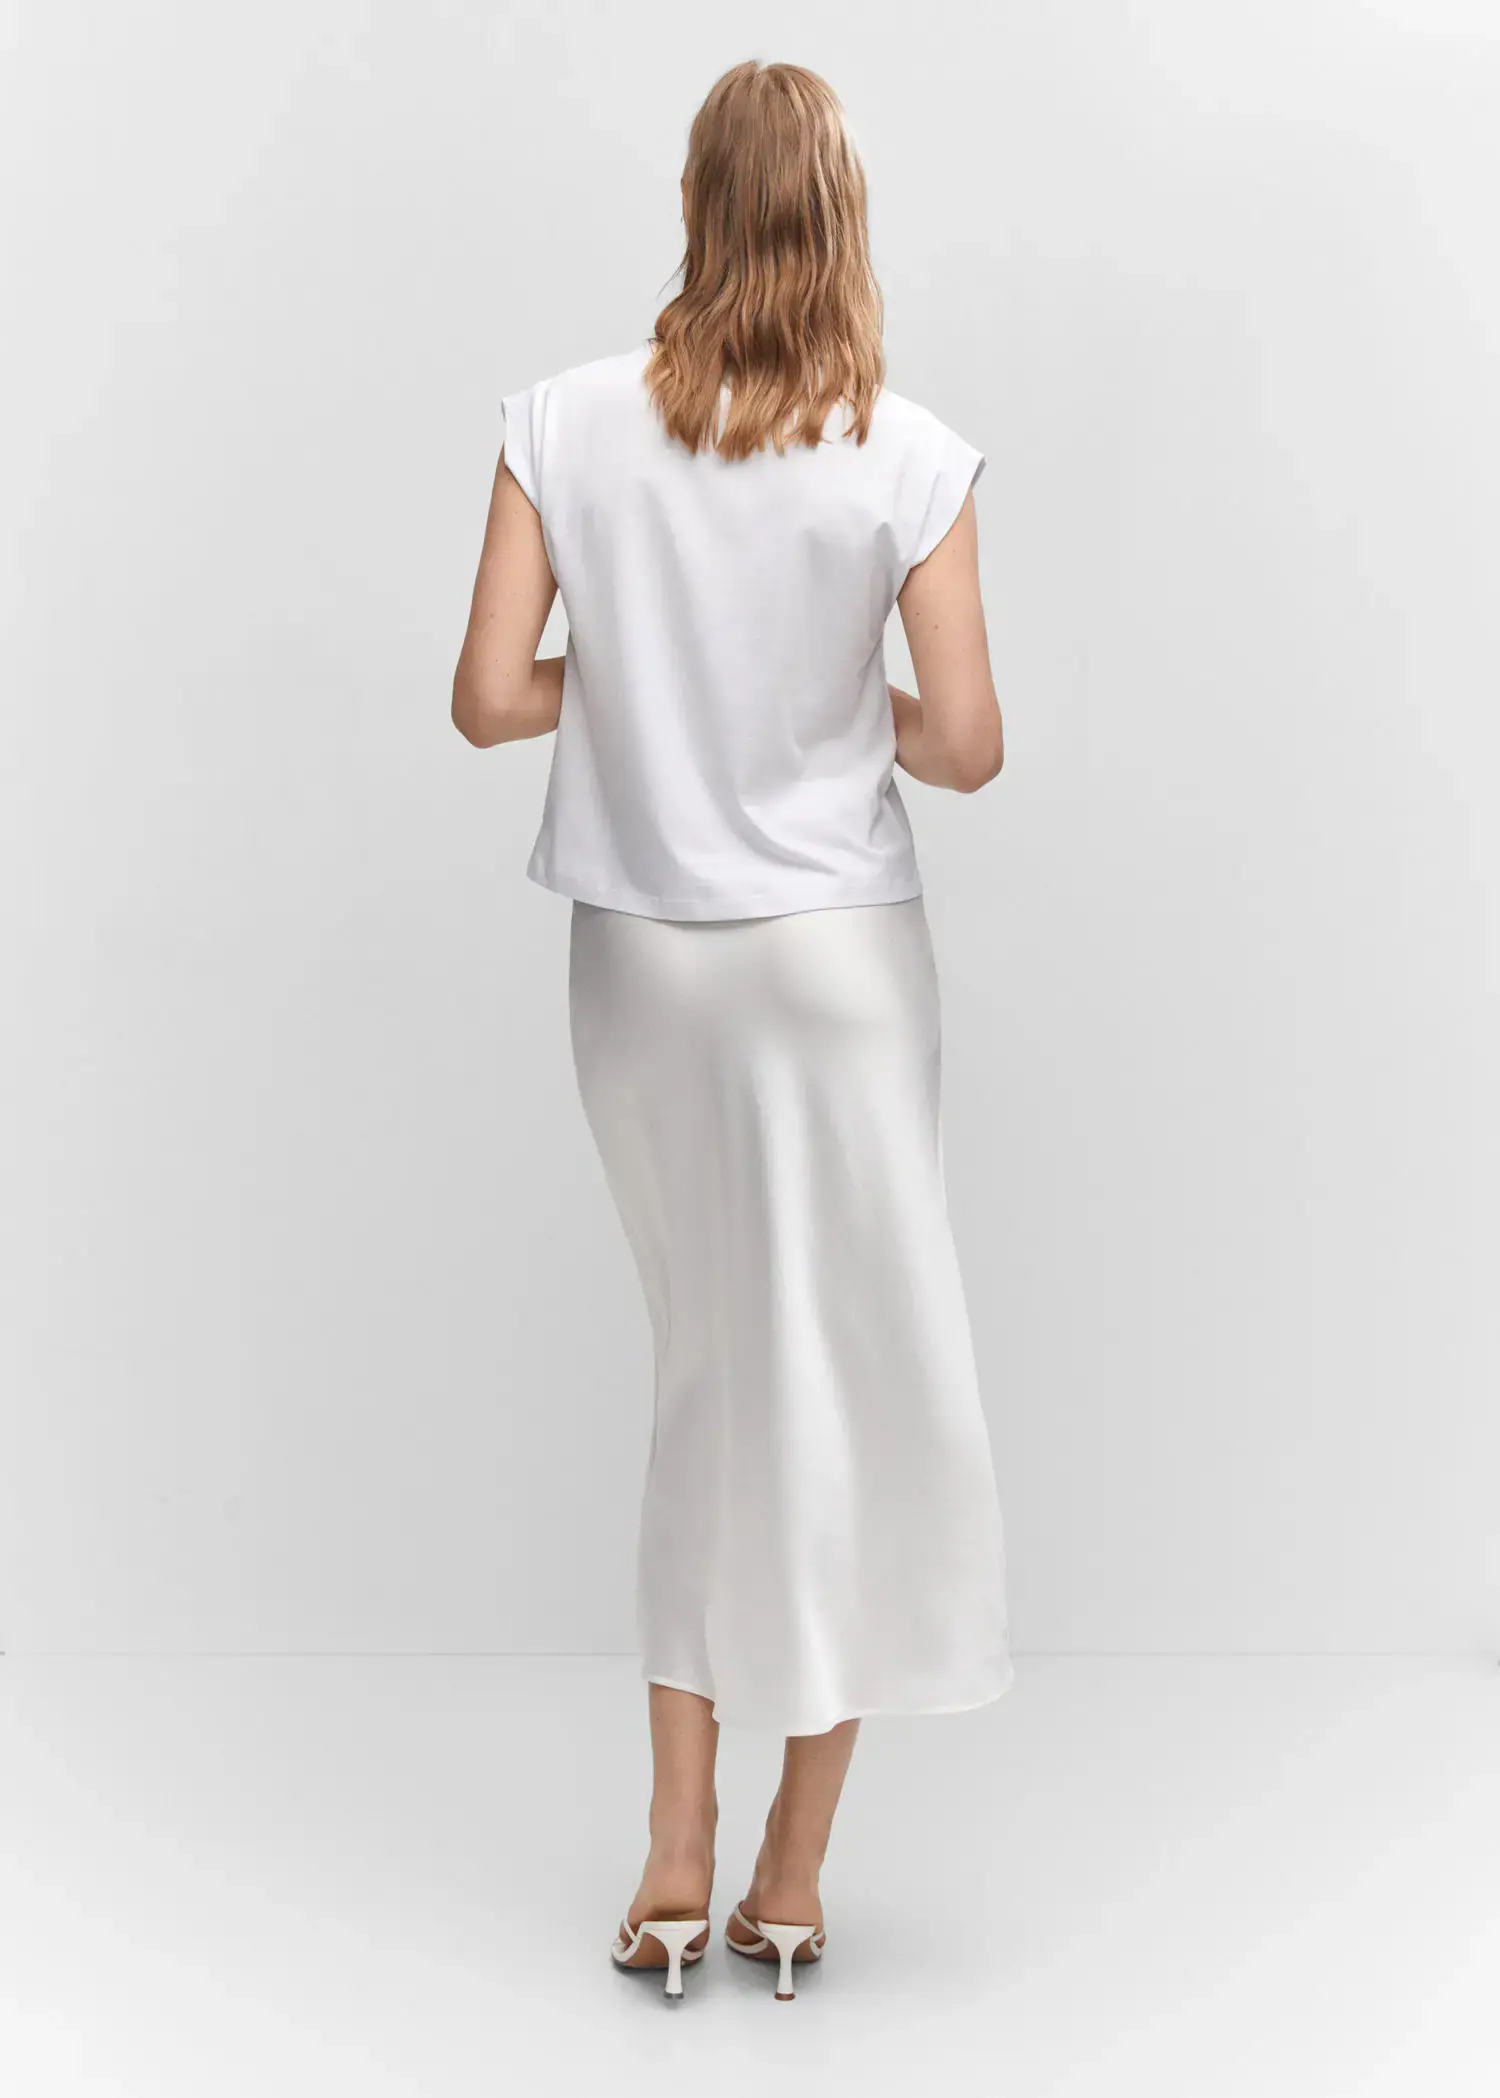 Mango Message cotton T-shirt. a woman in a white dress standing in front of a white wall. 